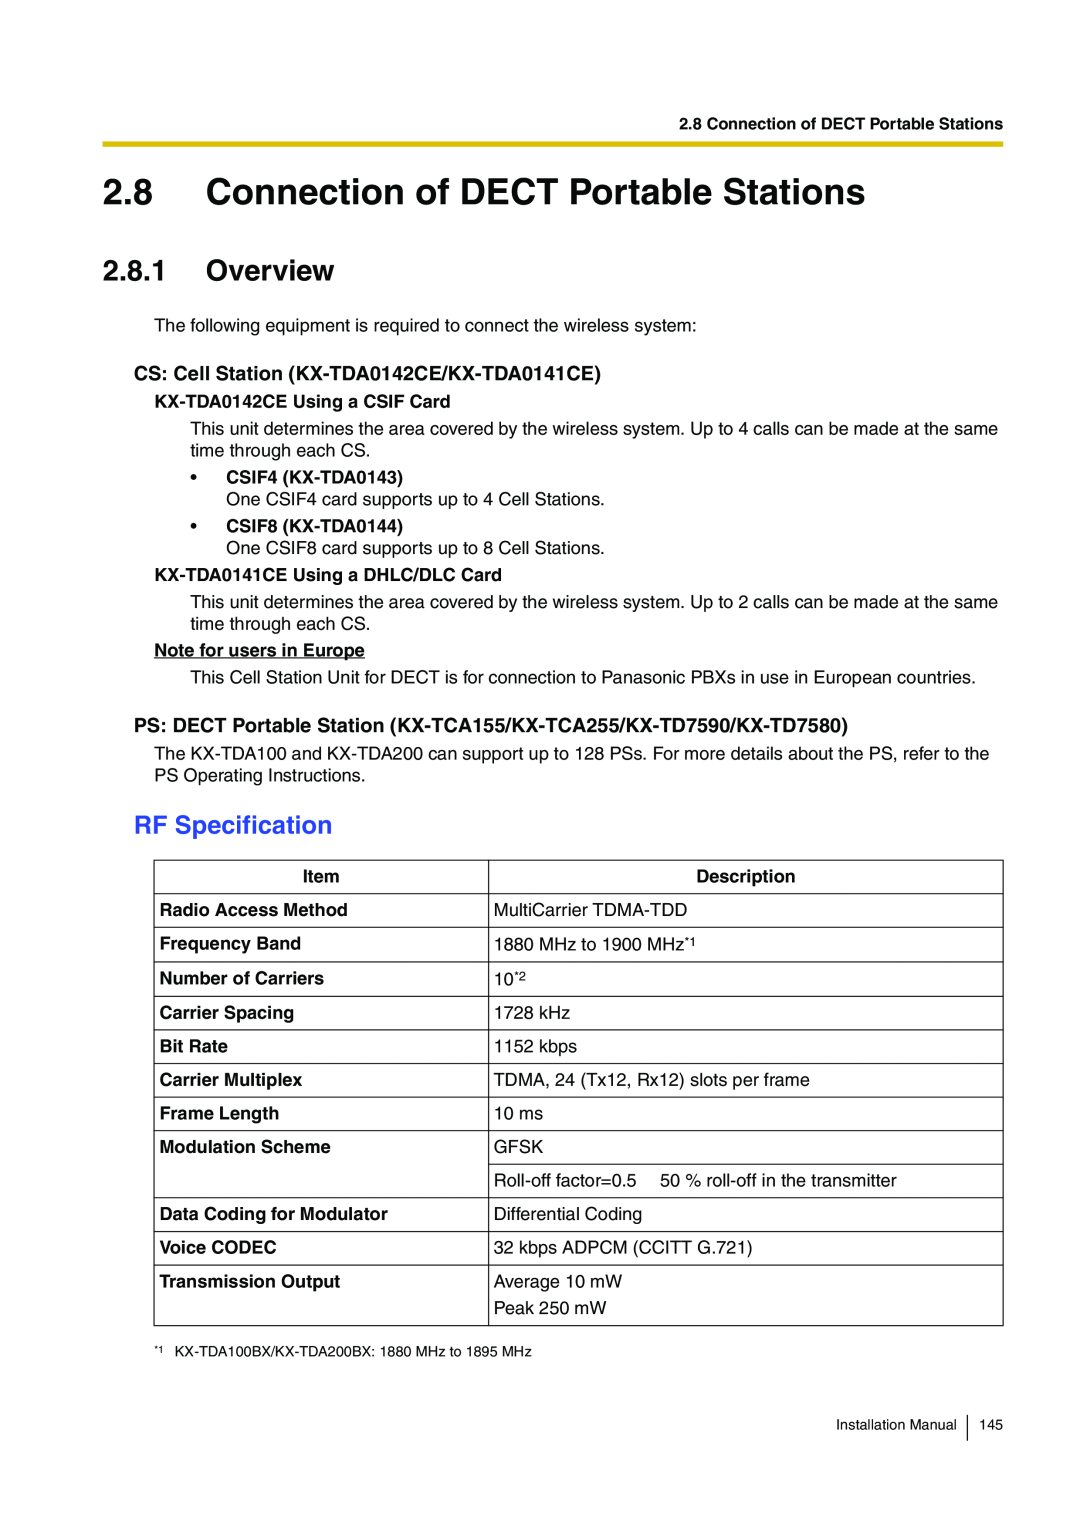 Panasonic KX-TDA100 Connection of DECT Portable Stations, Overview, RF Specification, KX-TDA0142CE Using a CSIF Card 